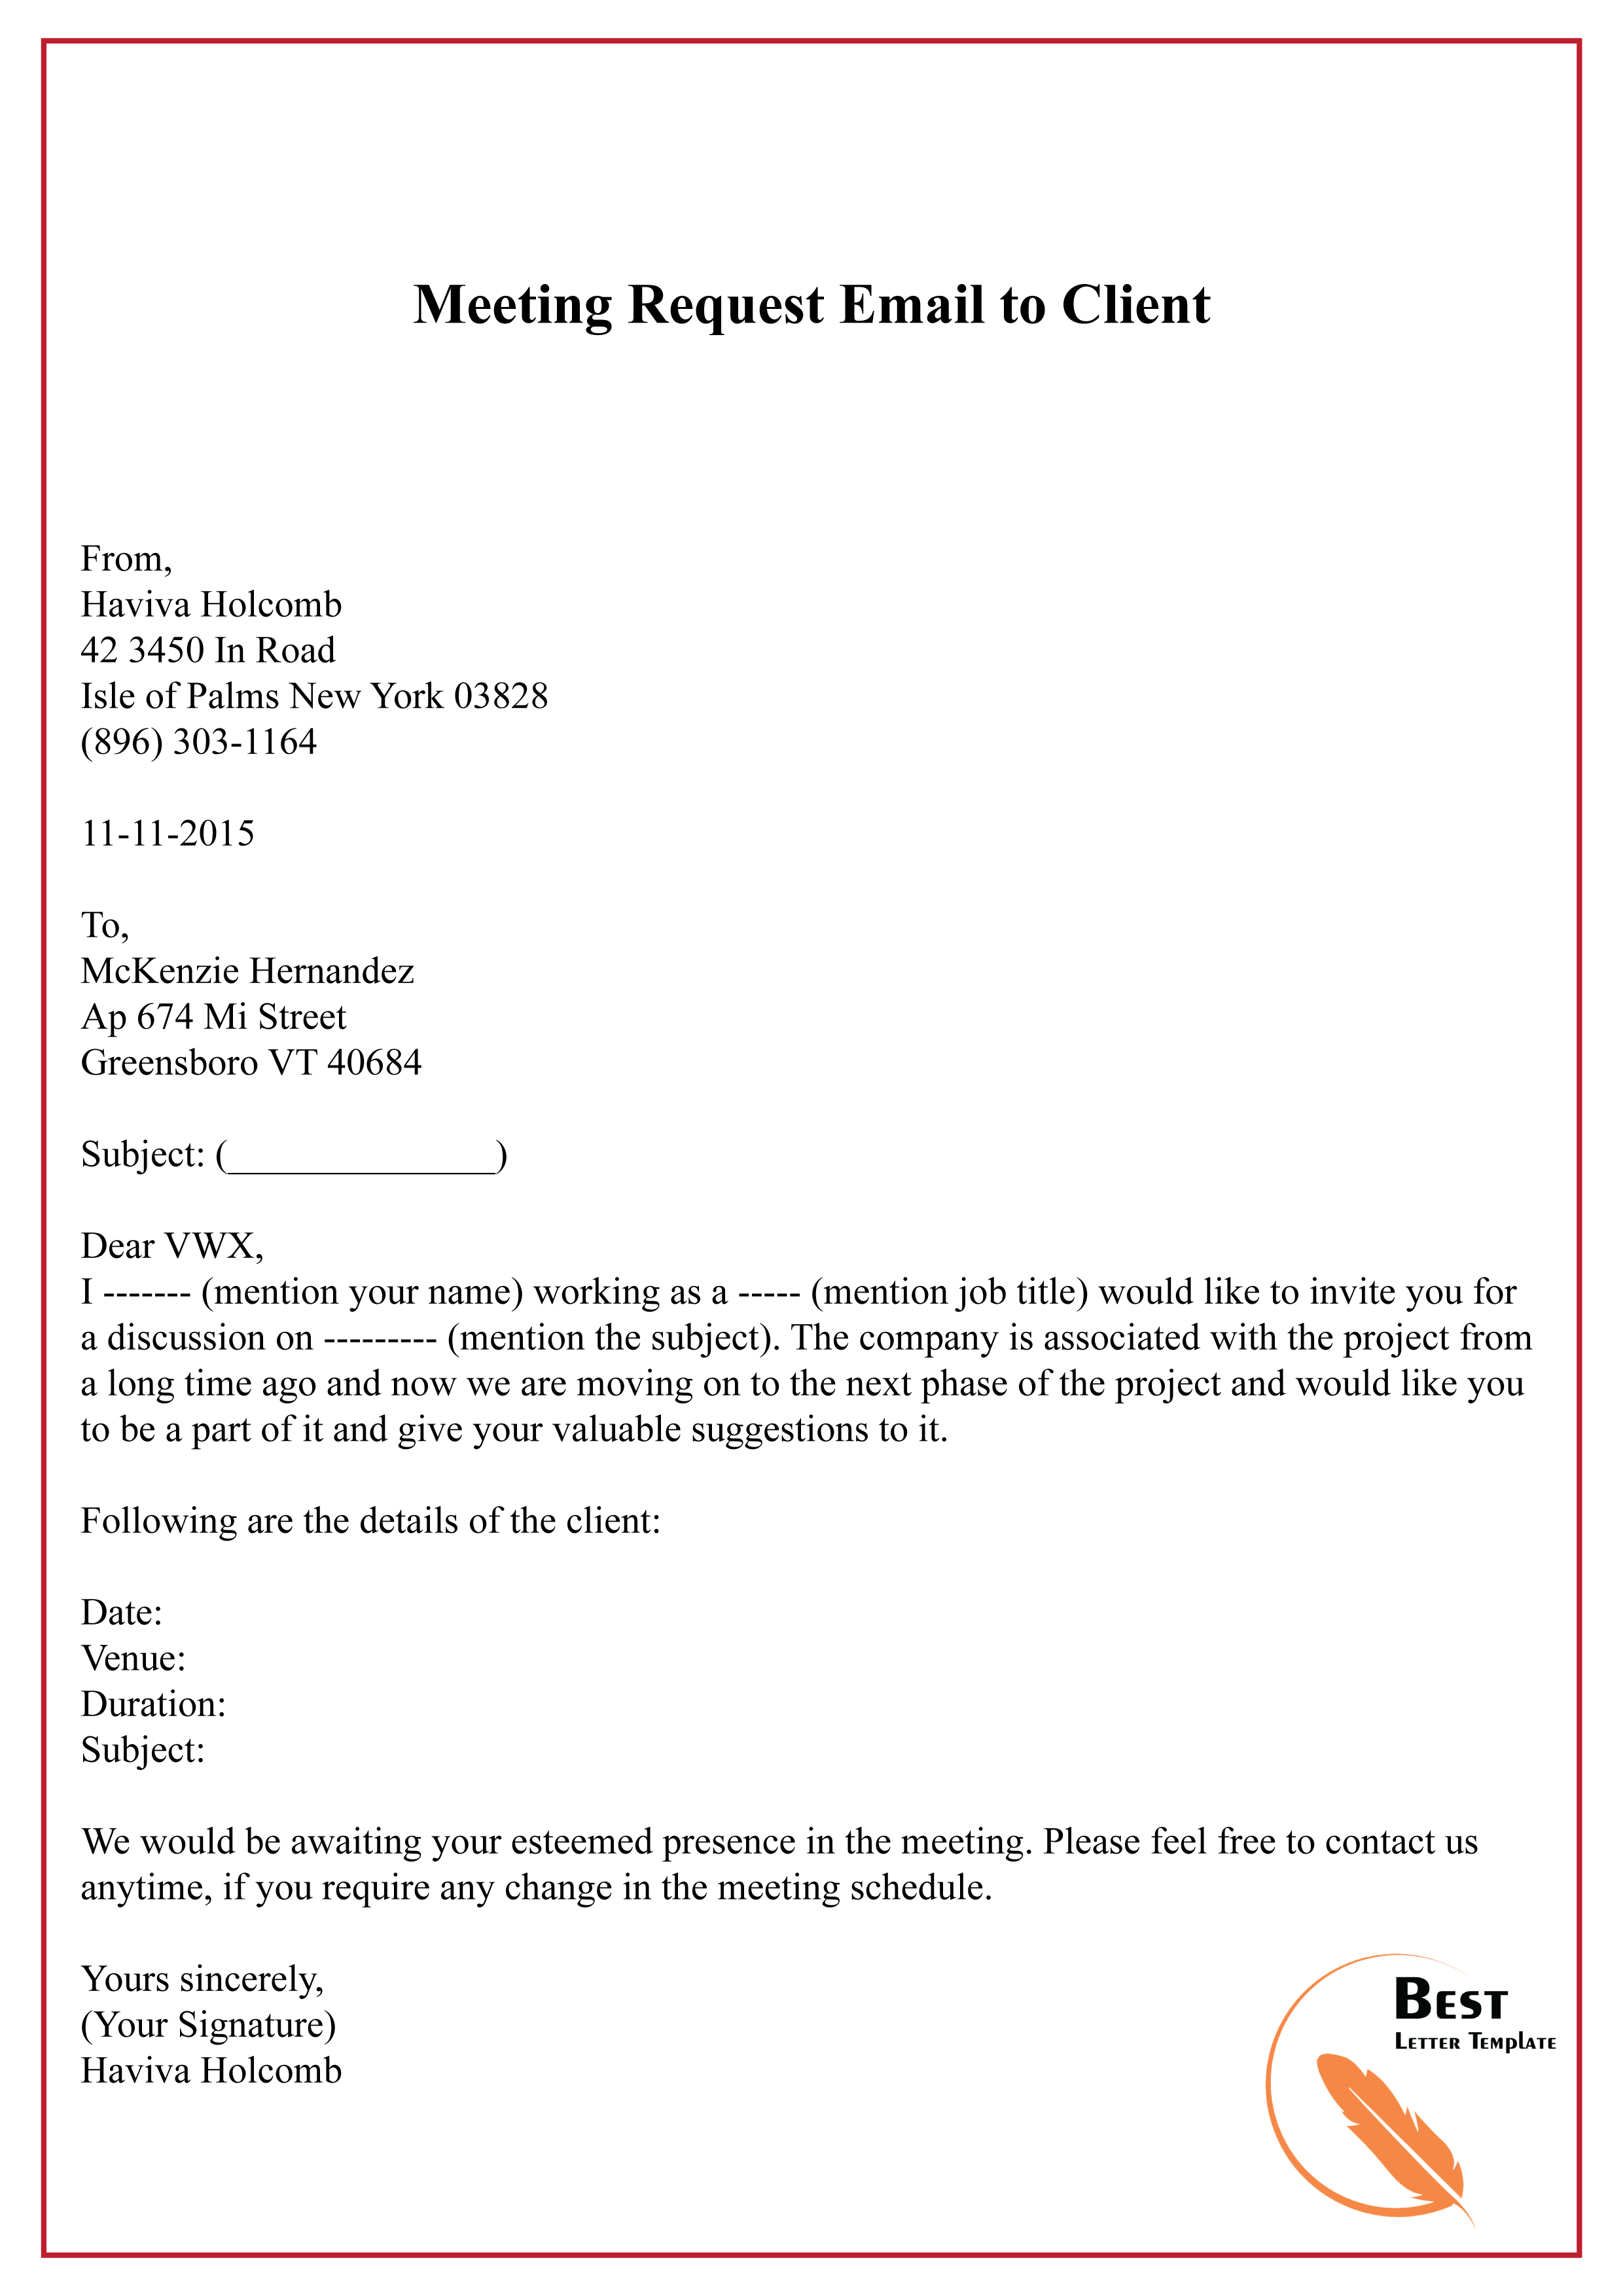 meeting-request-template